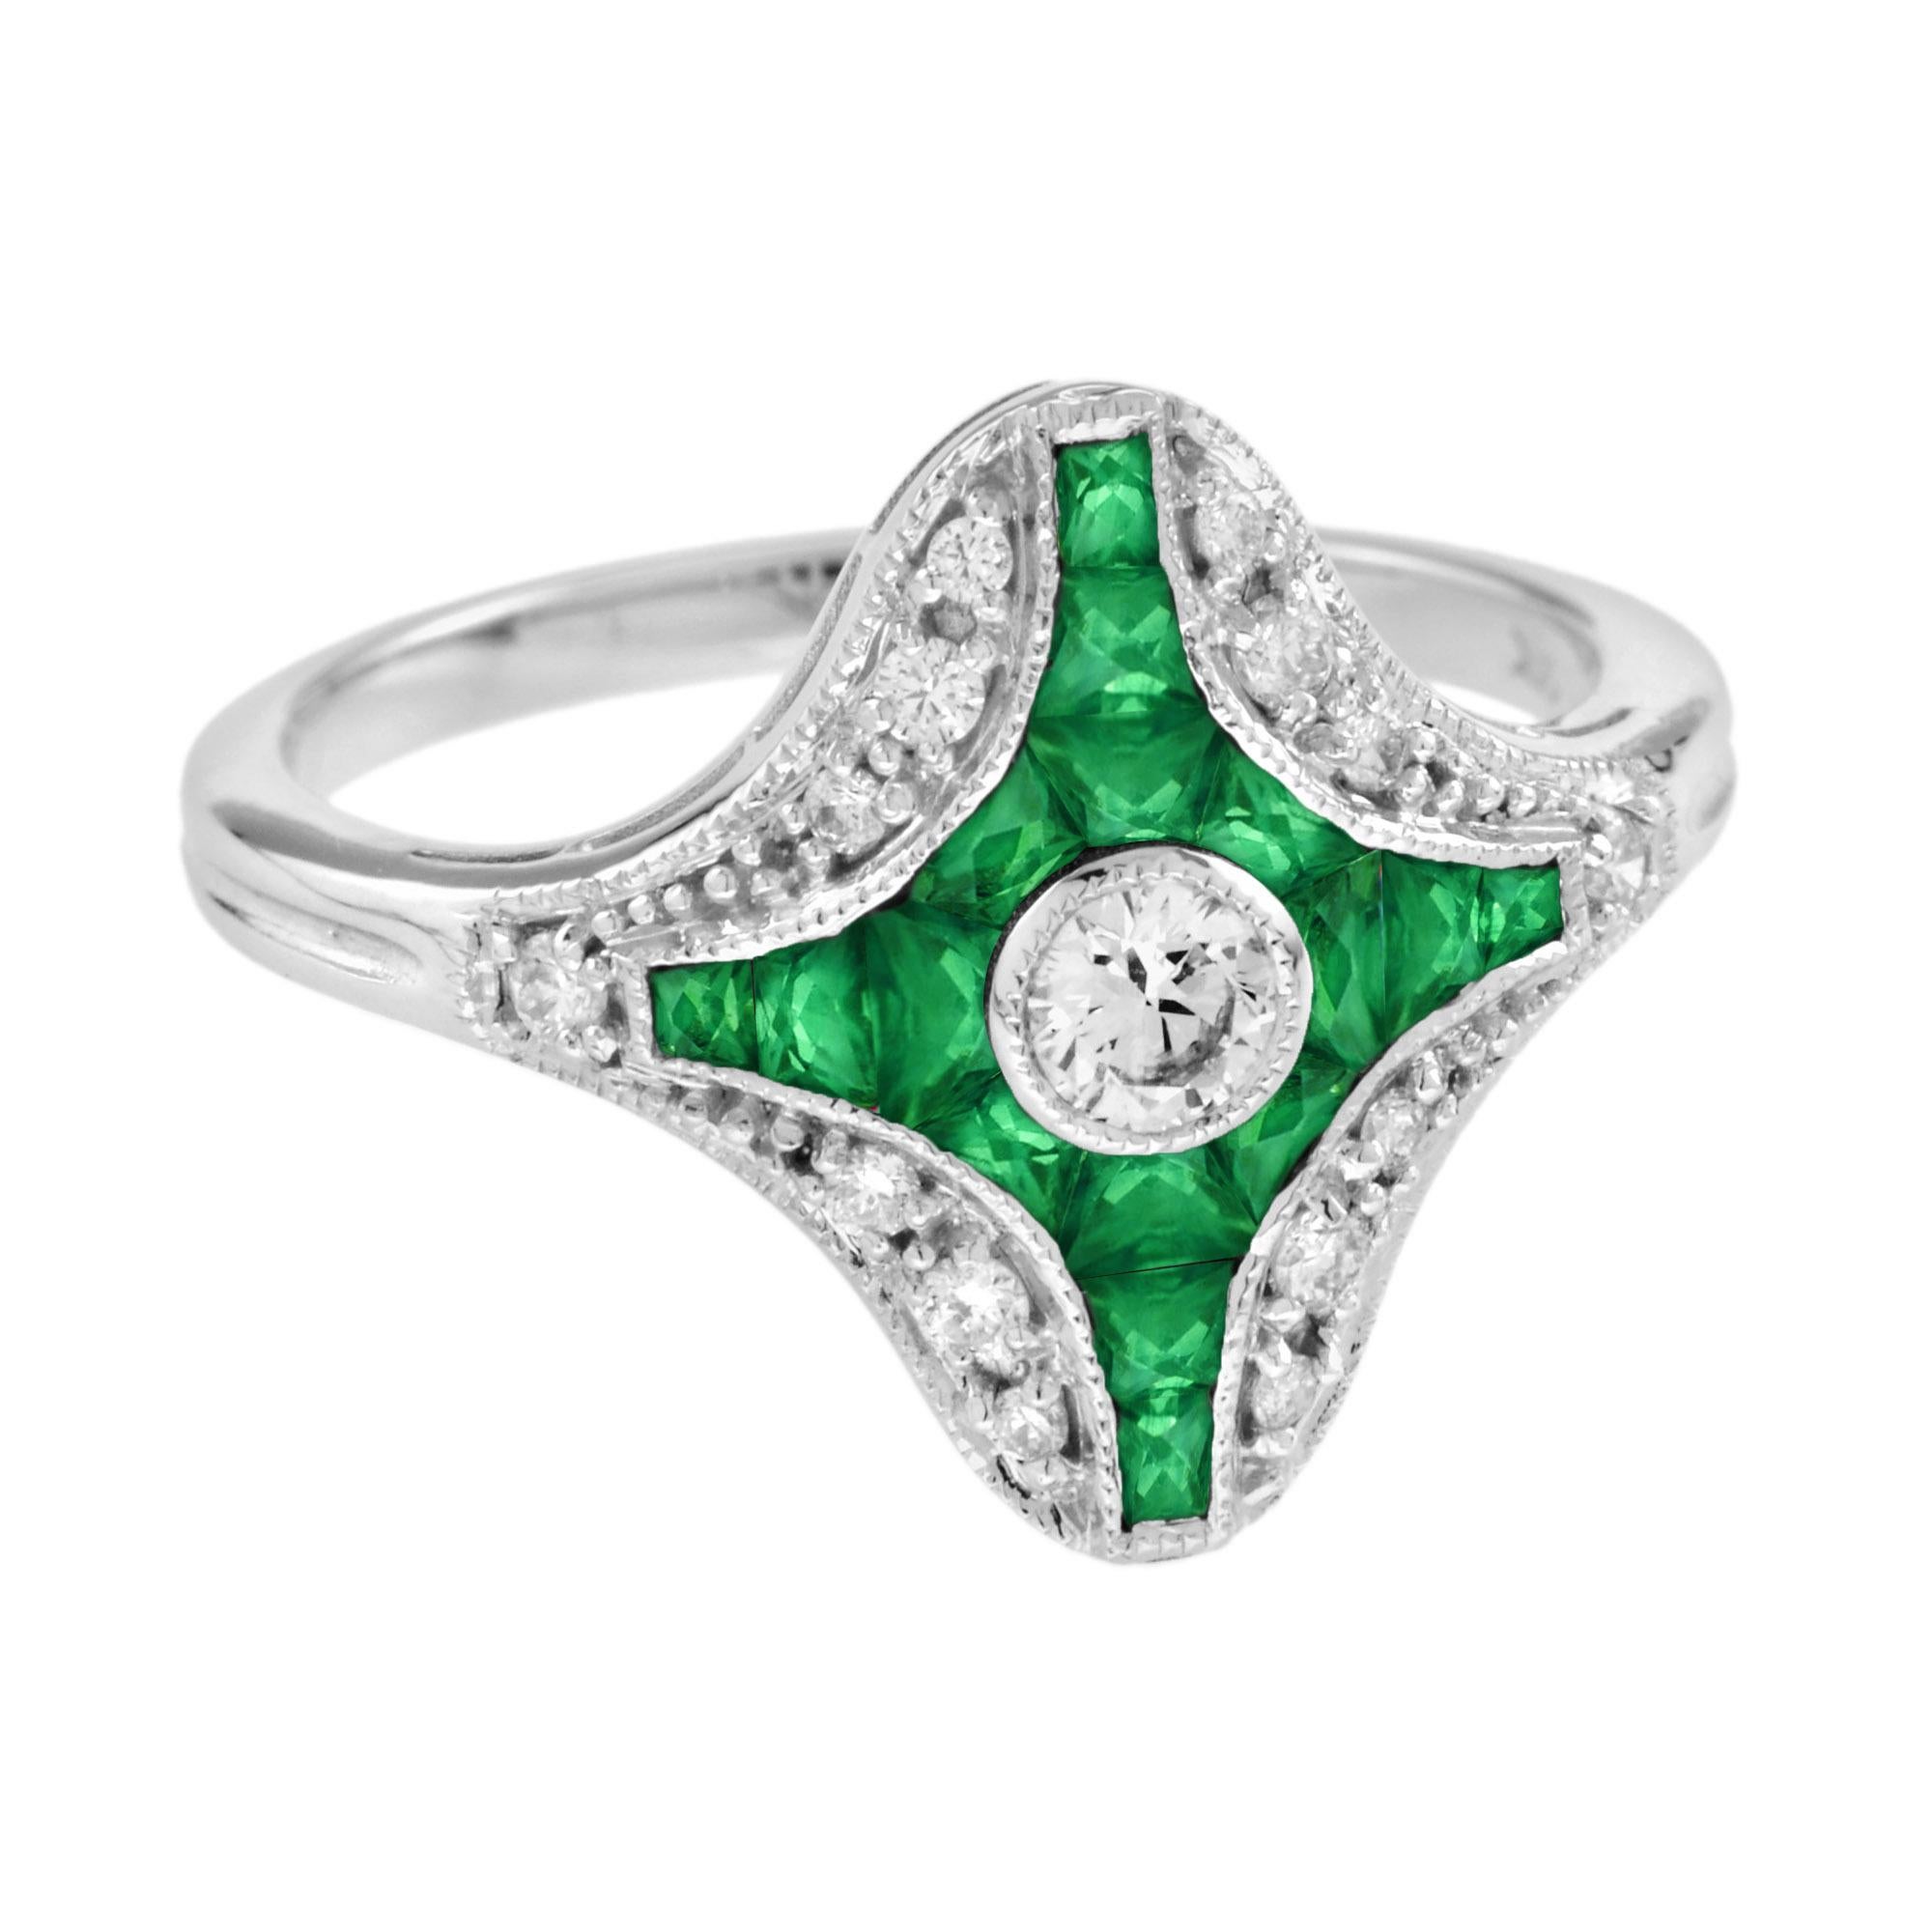 For Sale:  Diamond and Emerald Art Deco Style Ring in 14K white Gold 3